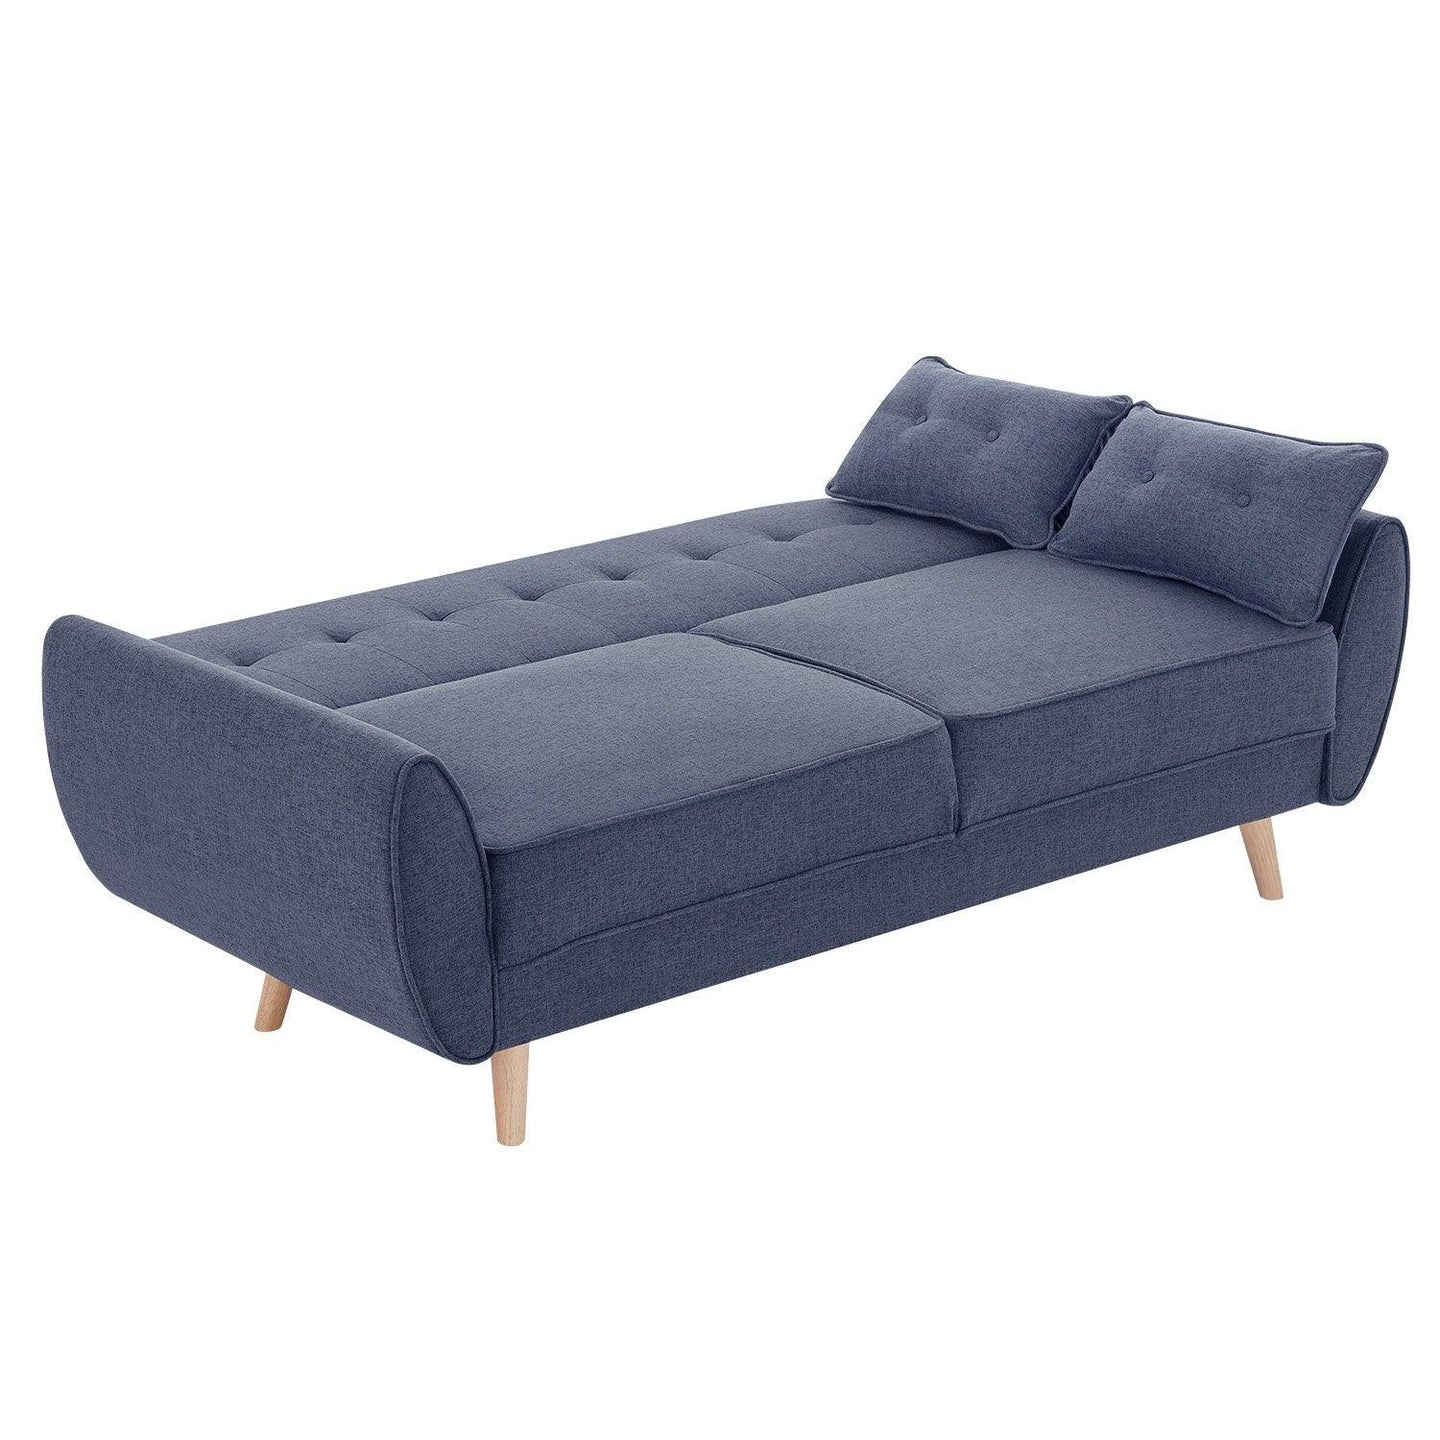 Buy Sarantino 3 Seater Modular Linen Fabric Sofa Bed Couch Futon Suite - Dark Grey discounted | Products On Sale Australia